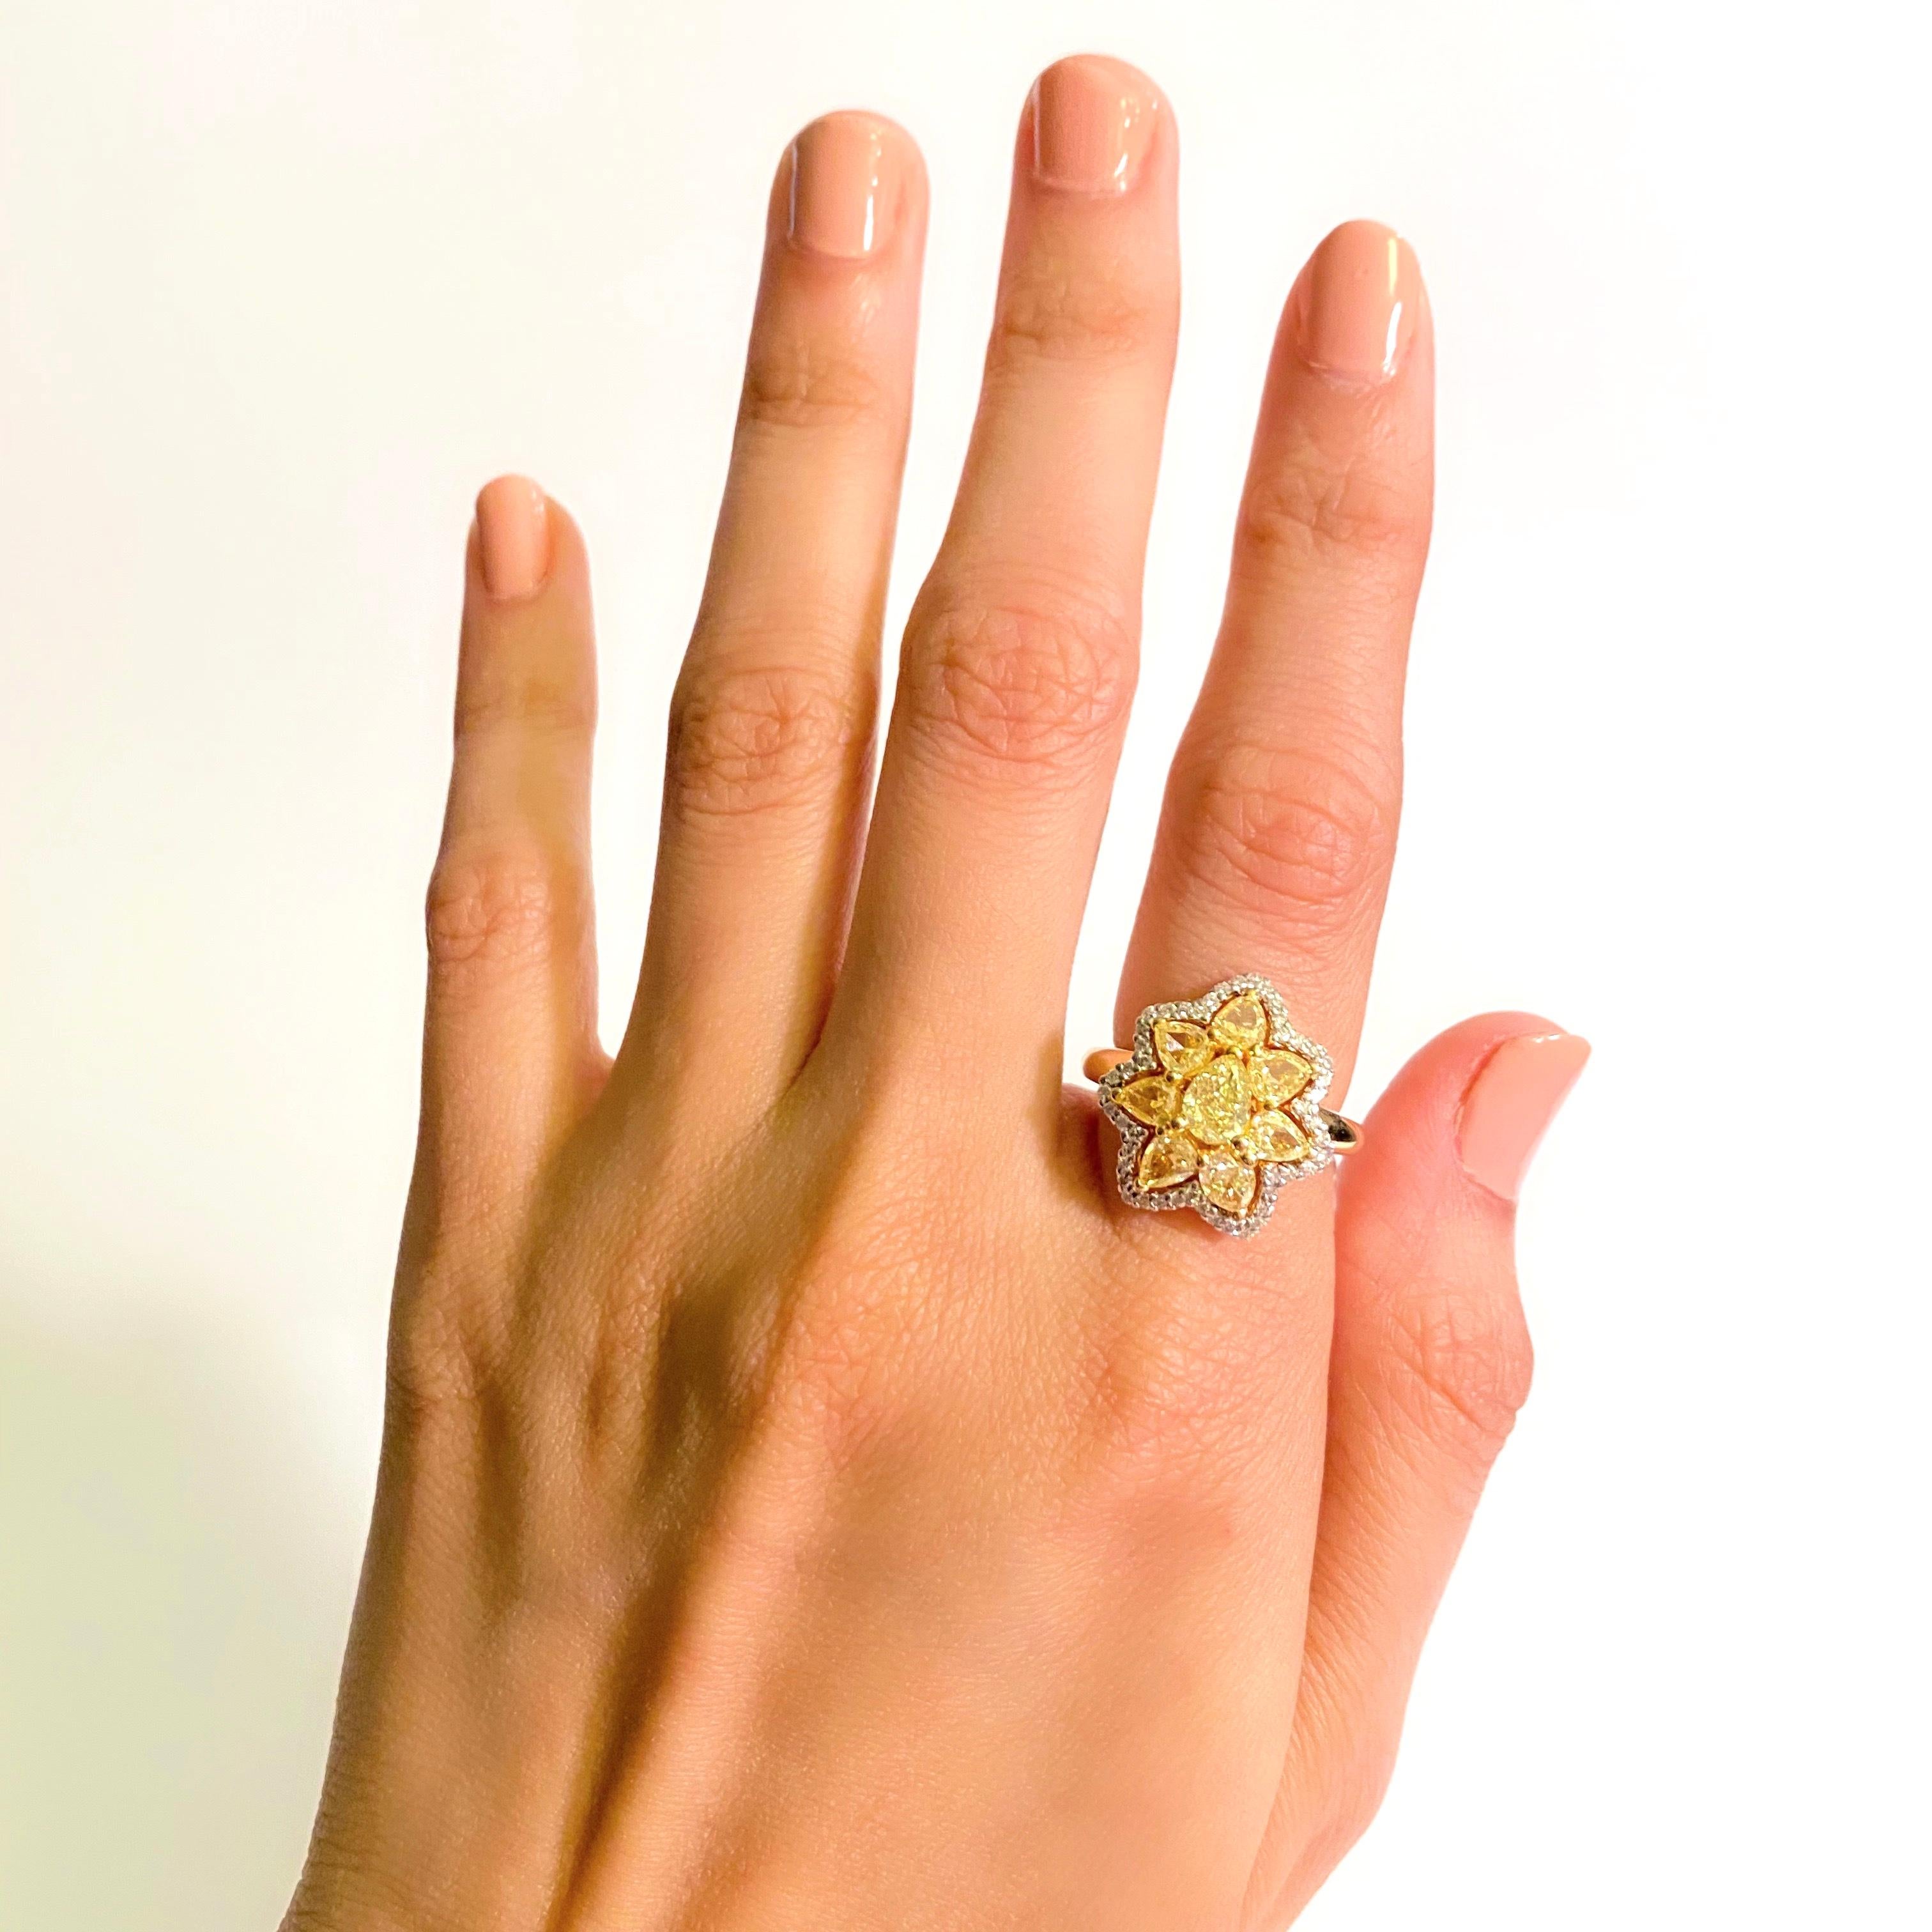 The Capella Star Ring is a radianting natural fancy yellow diamond ring, featuring 2 carats fancy yellow diamonds, matched with 0.5 carats of round brilliant diamonds. 

Shape Pear 
Color Natural fancy yellow
Clarity VS, VVS2
Weight 1.99 carats
Side